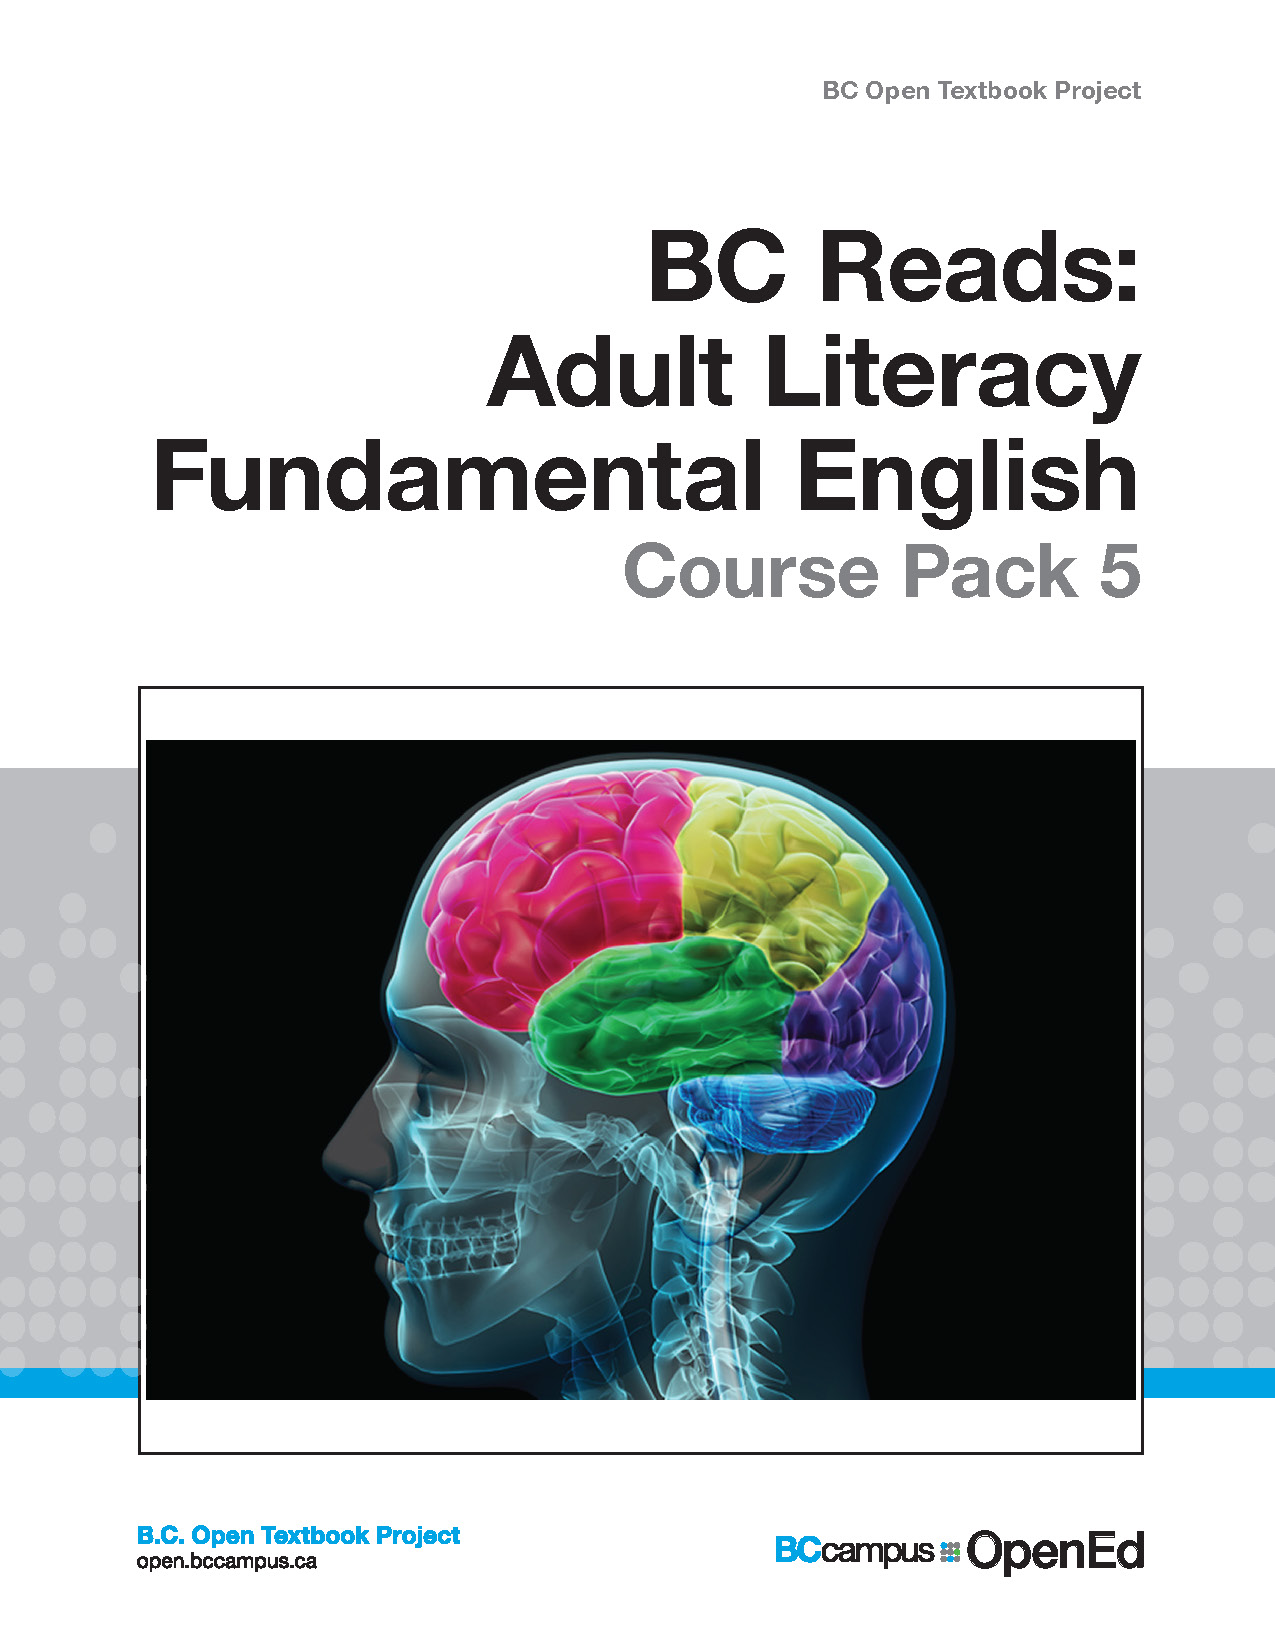 Cover image for Adult Literacy Fundamental English - Course Pack 5